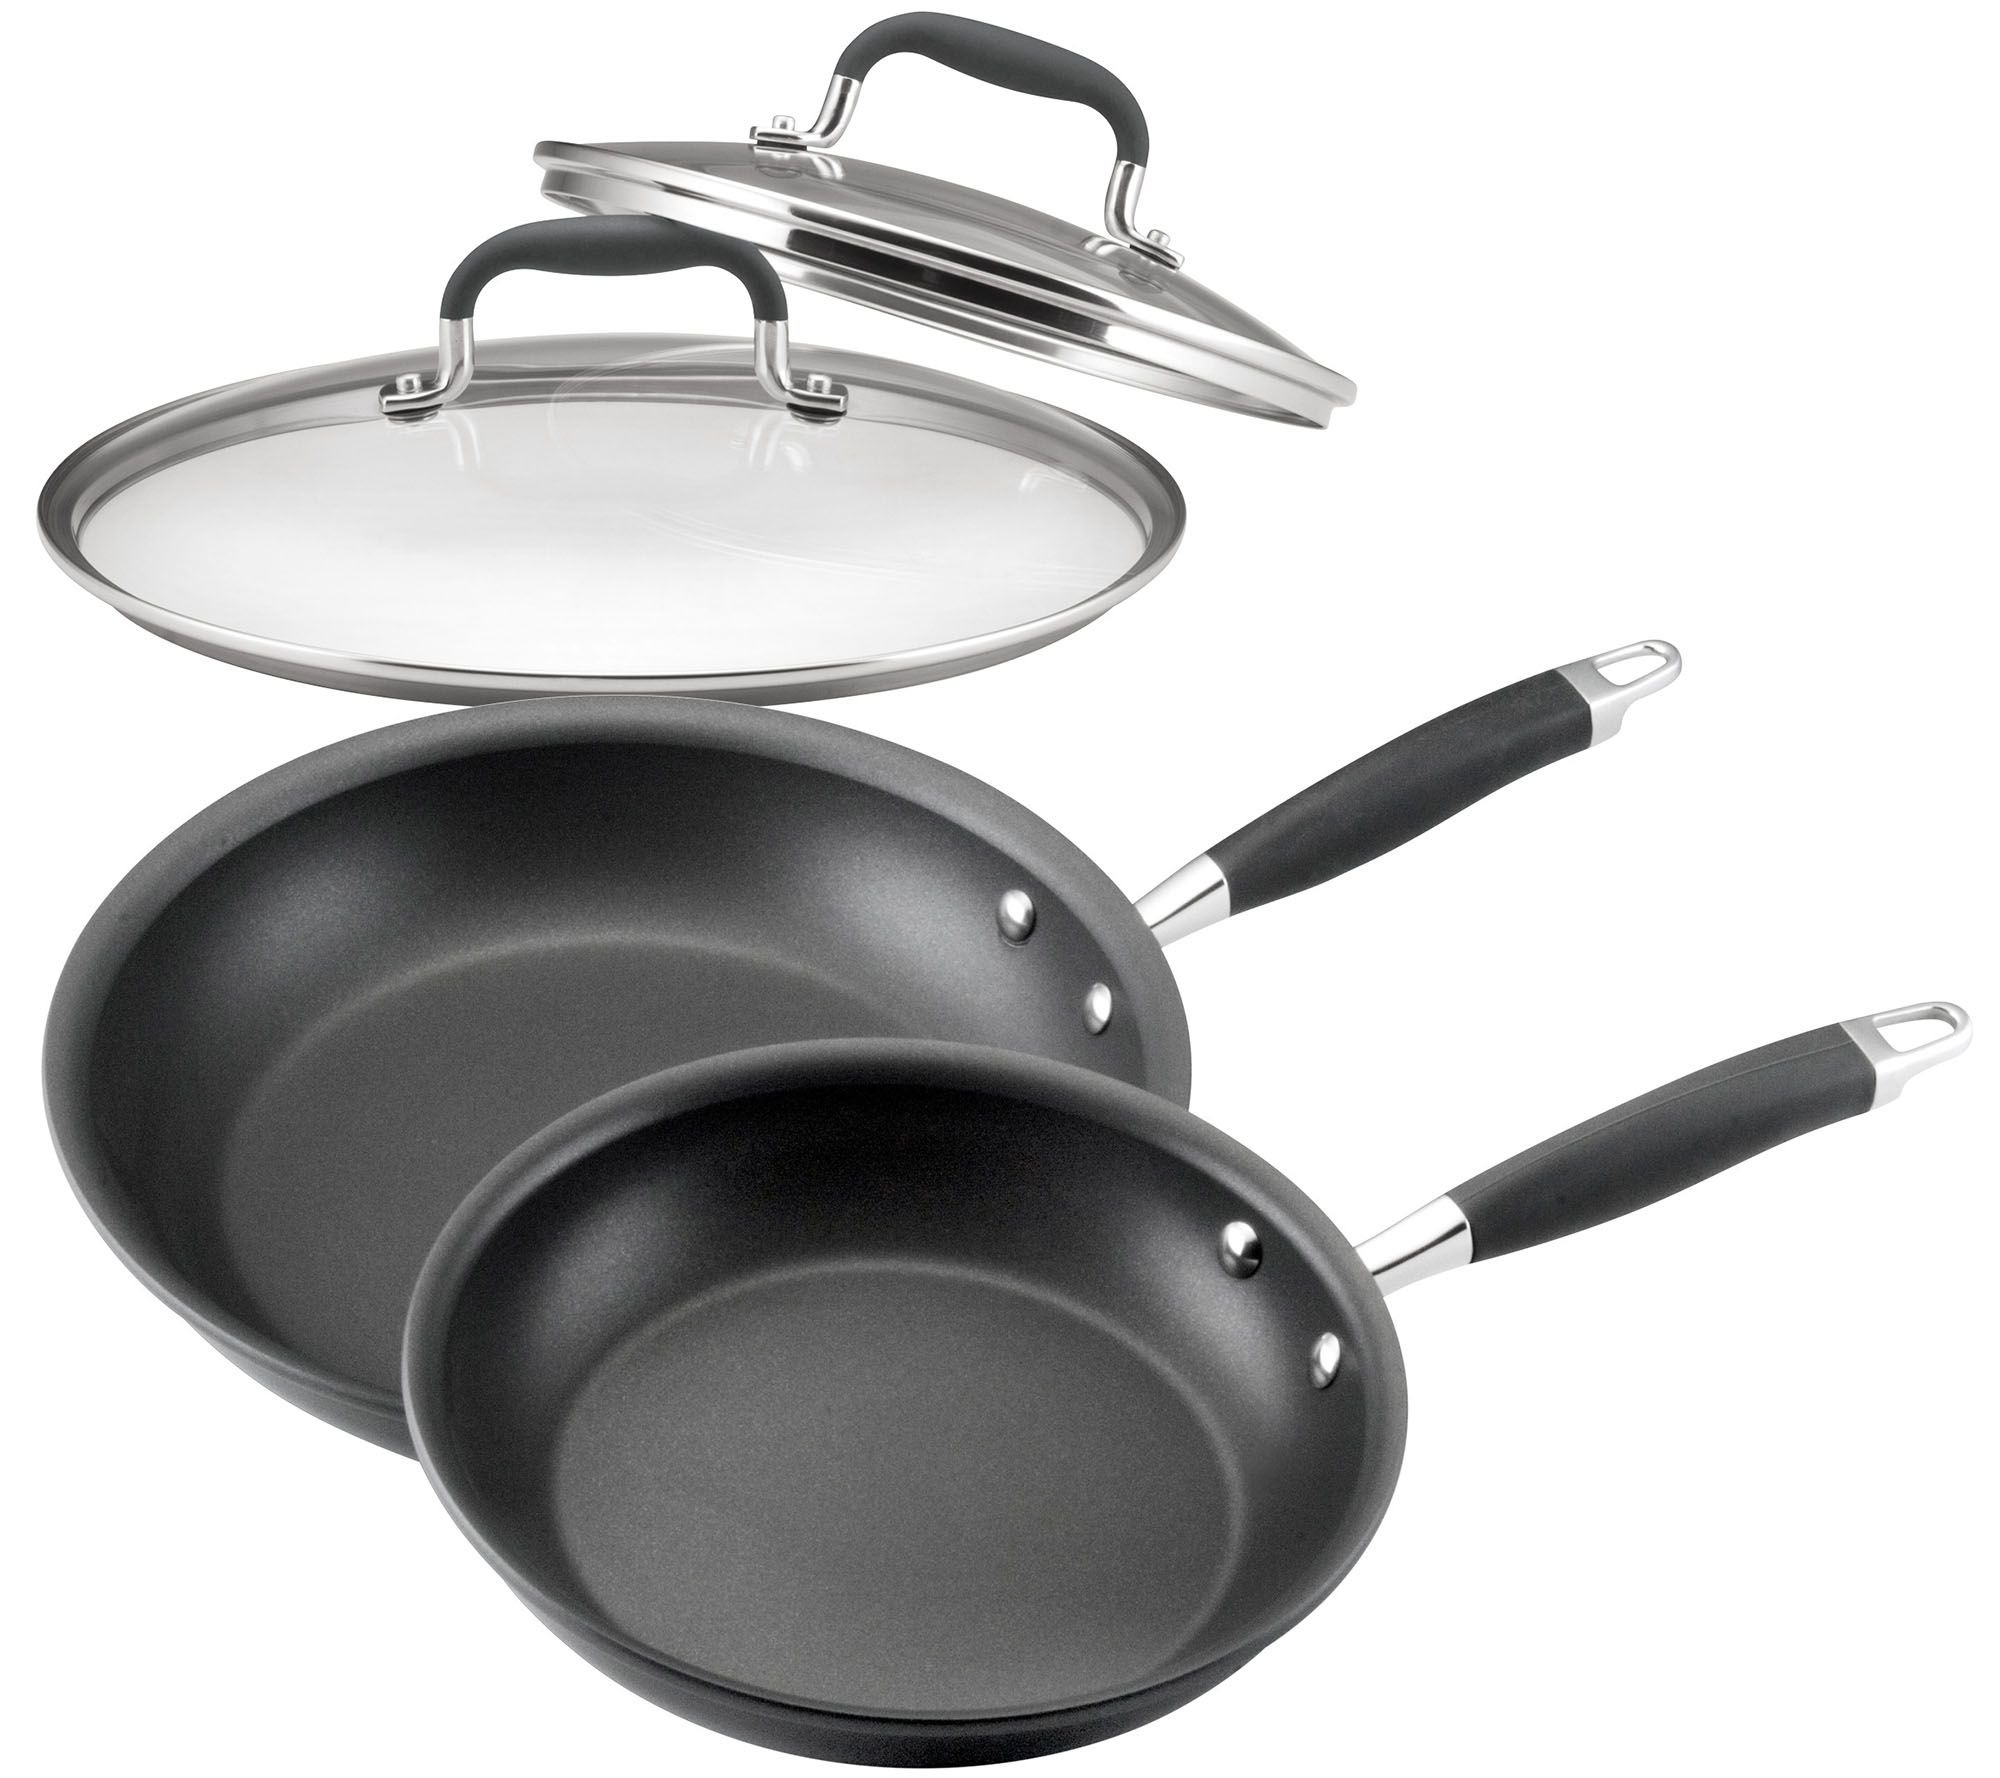 Anolon Accolade Hard Anodized 2-Piece Nonstick Frying Pan Set ,Gray